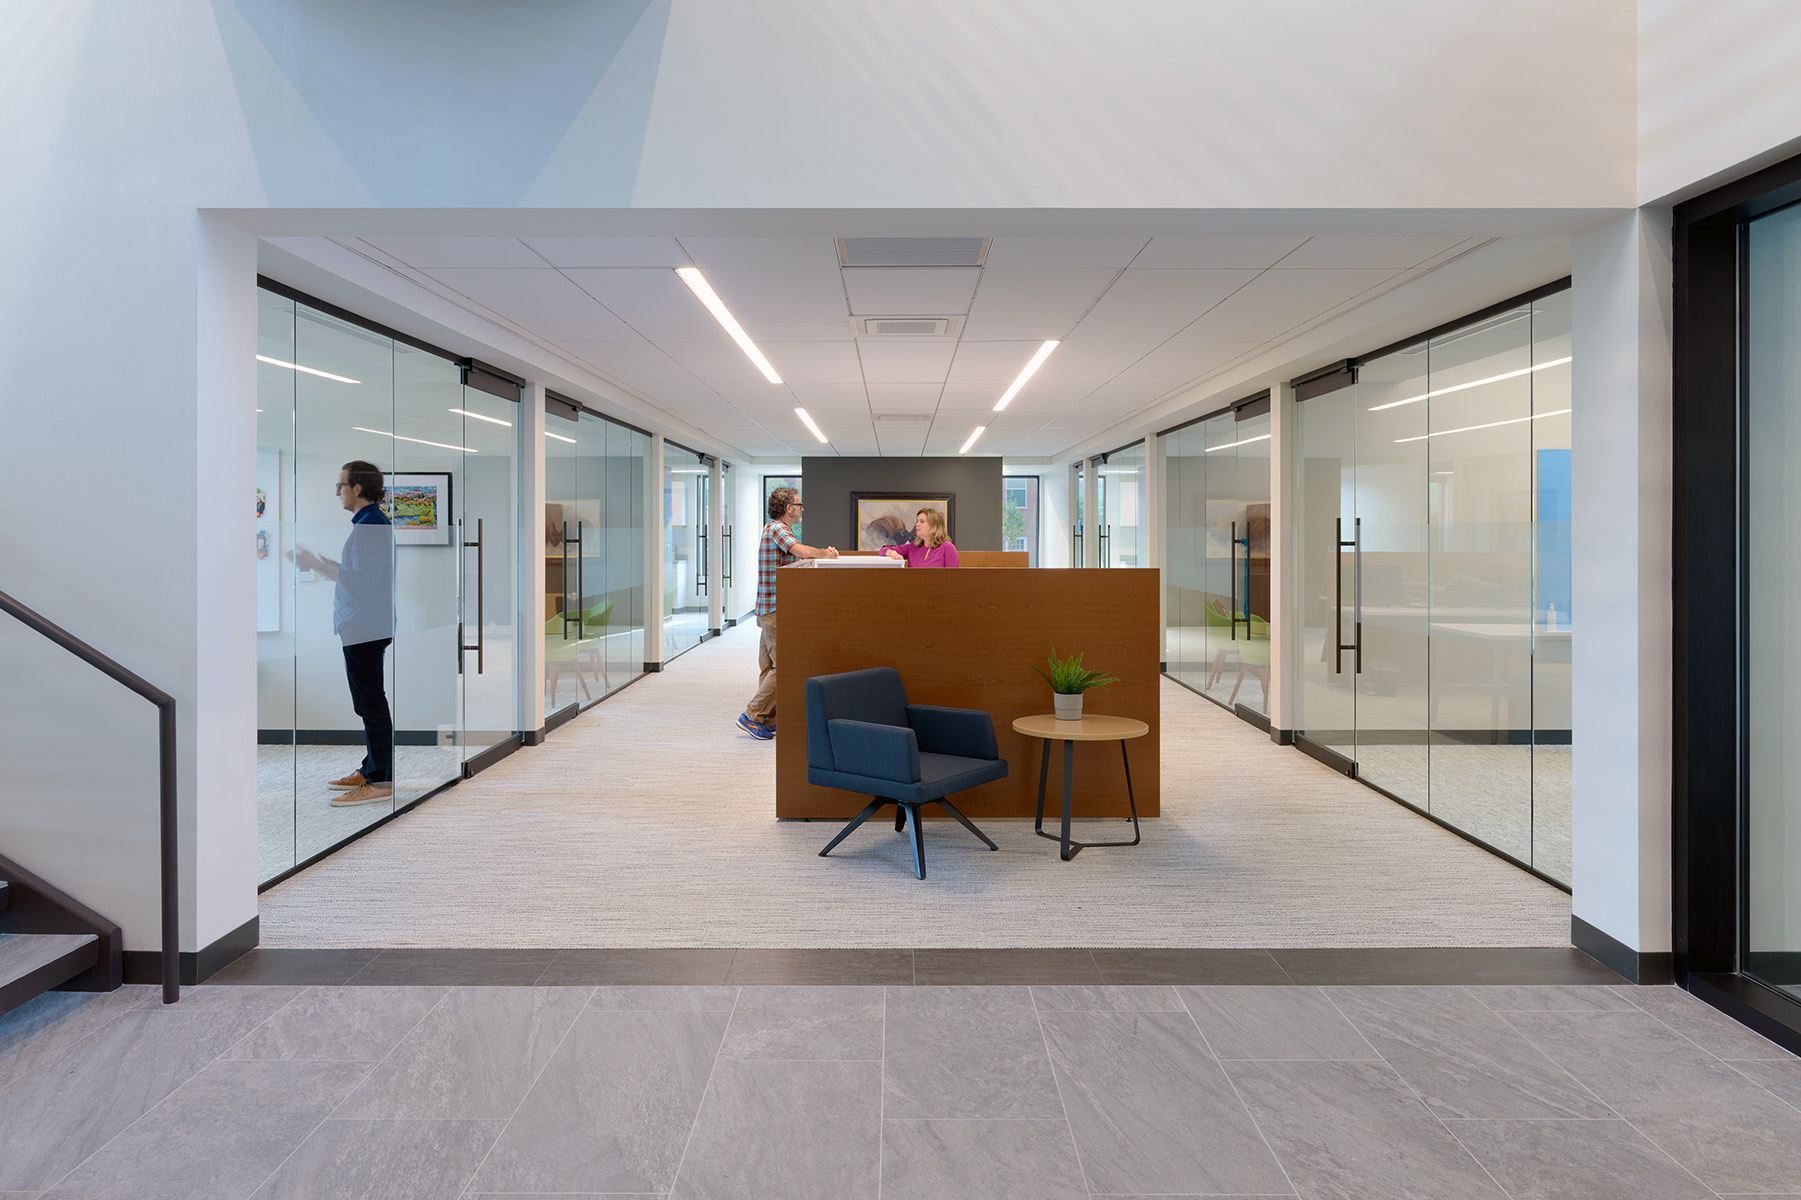 Linear recessed lights line a grid ceiling in a team collaboration area between offices with sliding glass fronts.